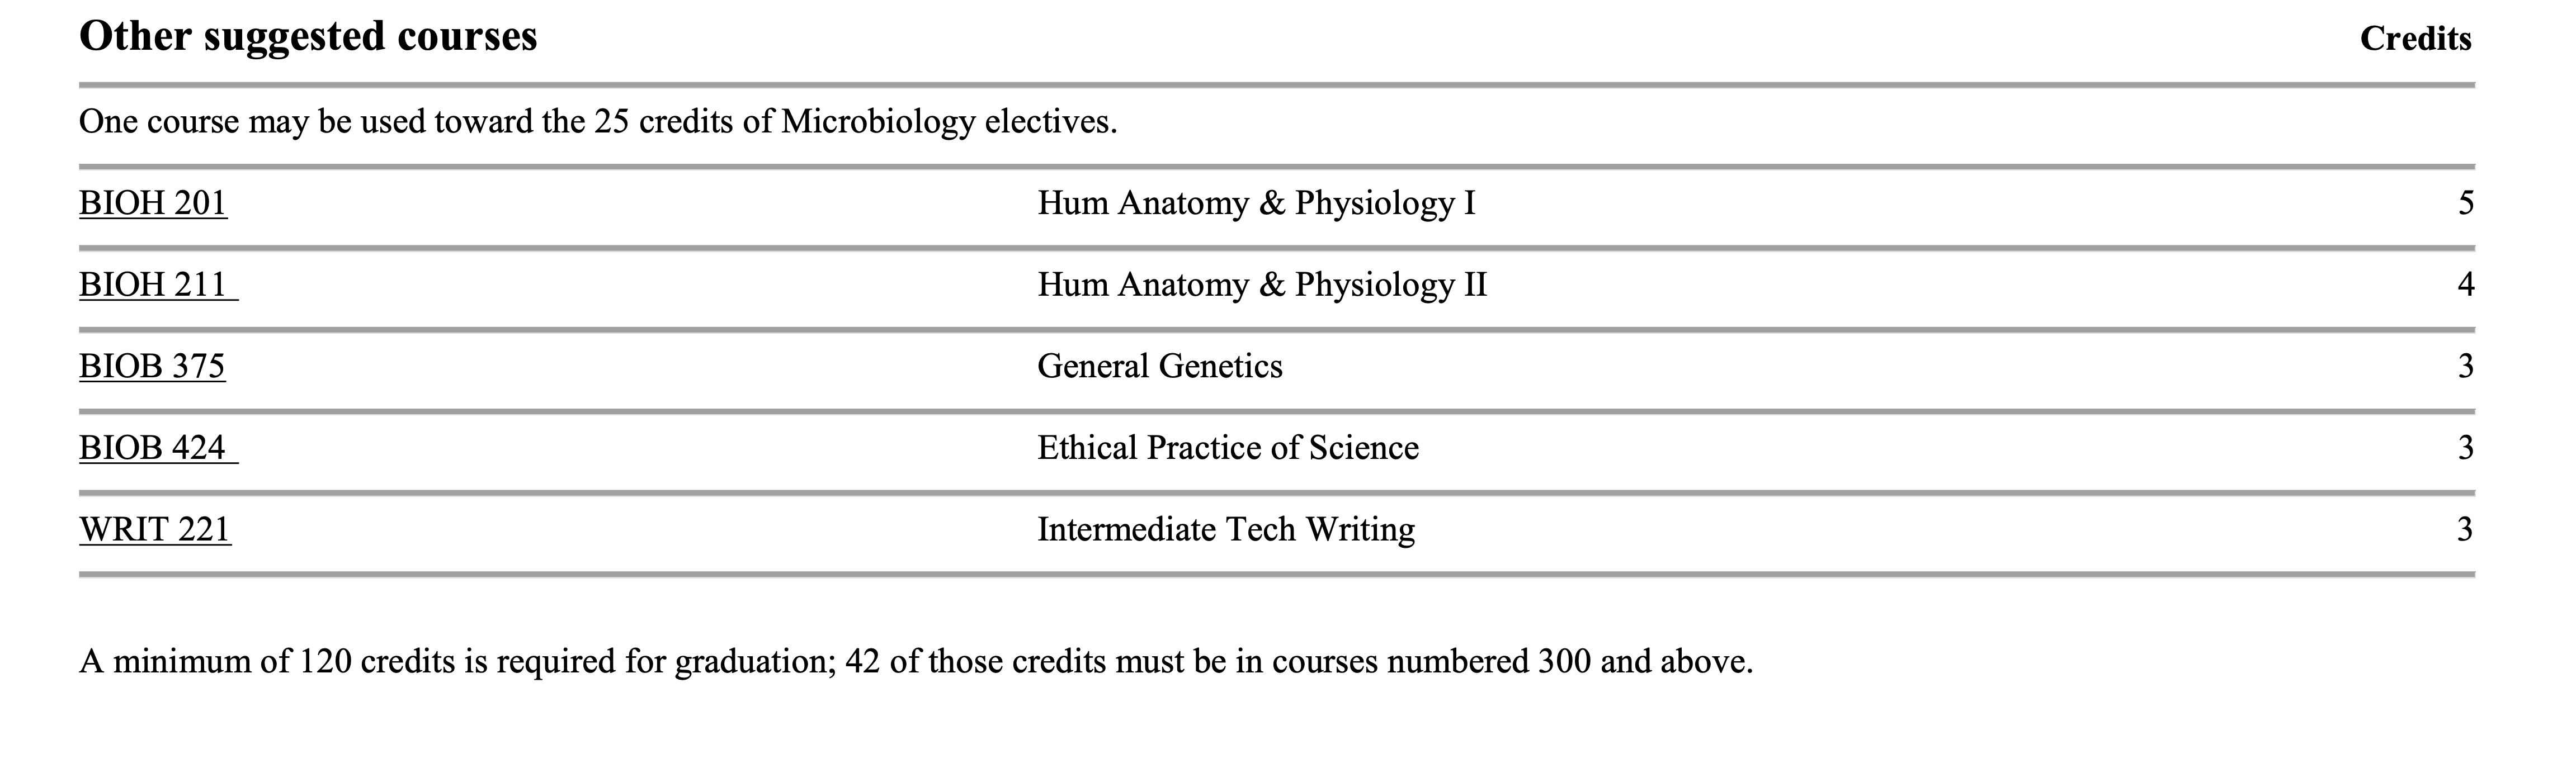 Suggested Courses